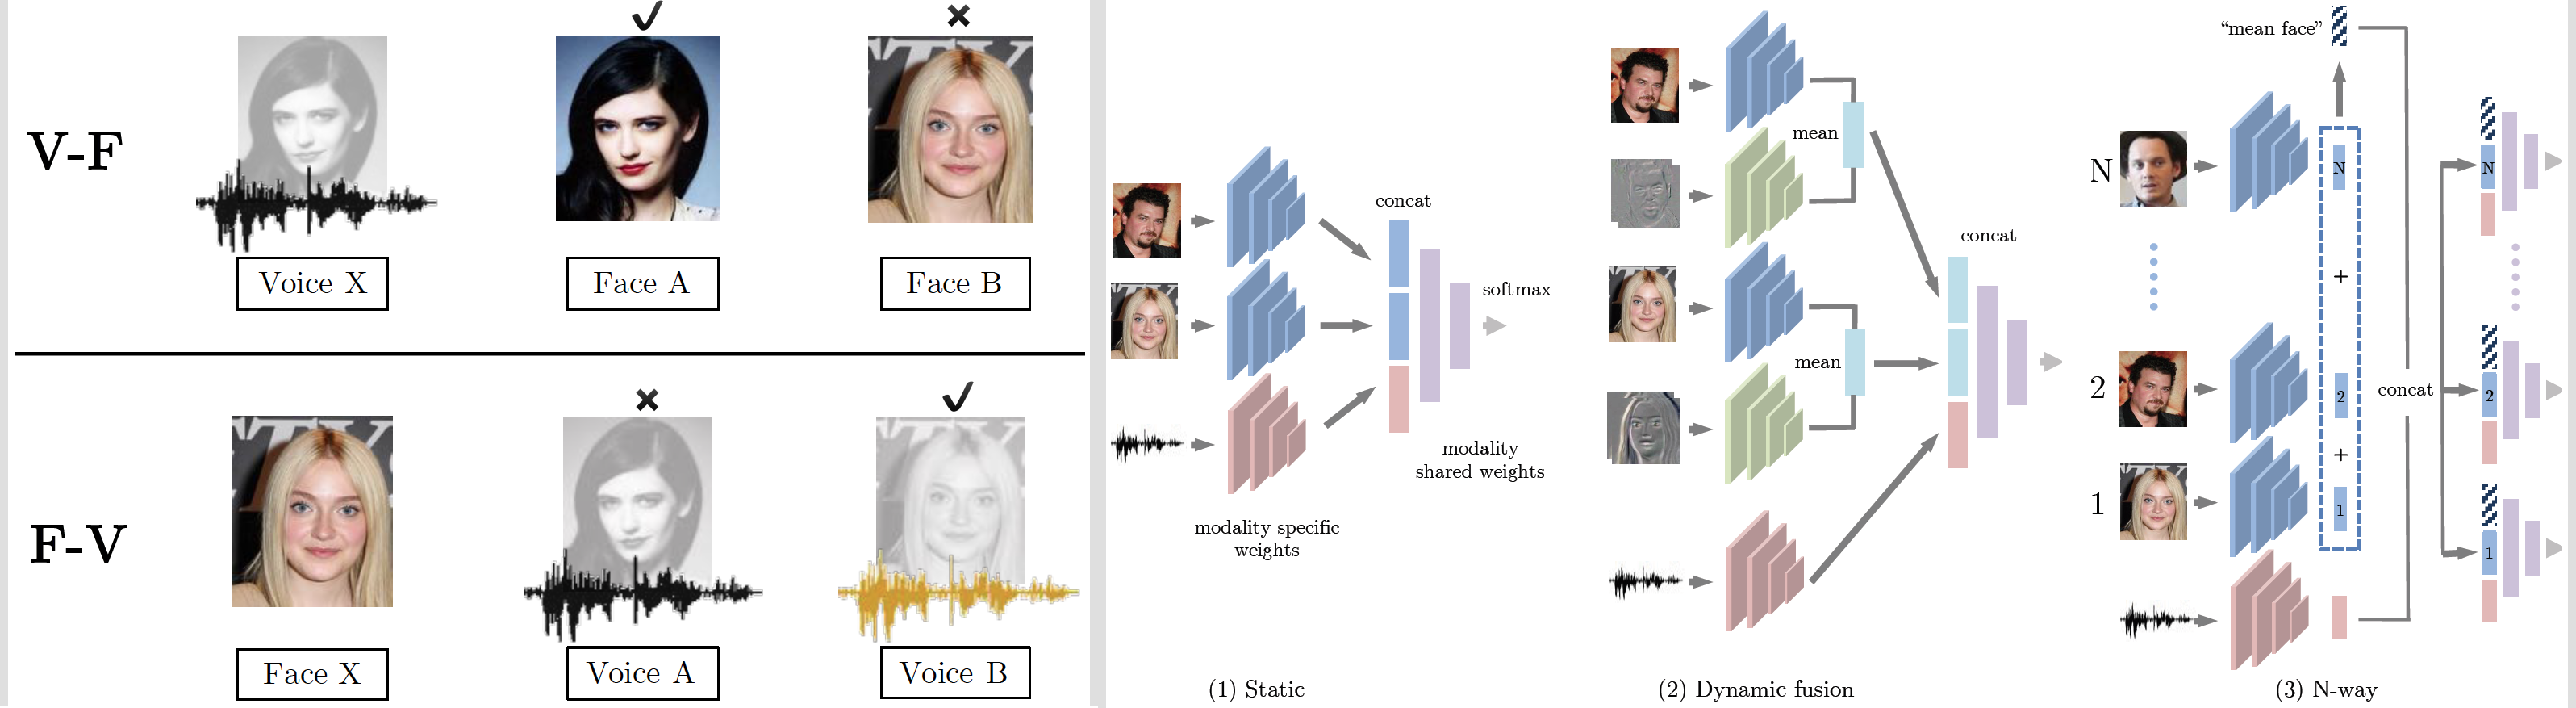 Seeing_Voices_and_Hearing_Faces_Cross-modal_biometric_matching.png